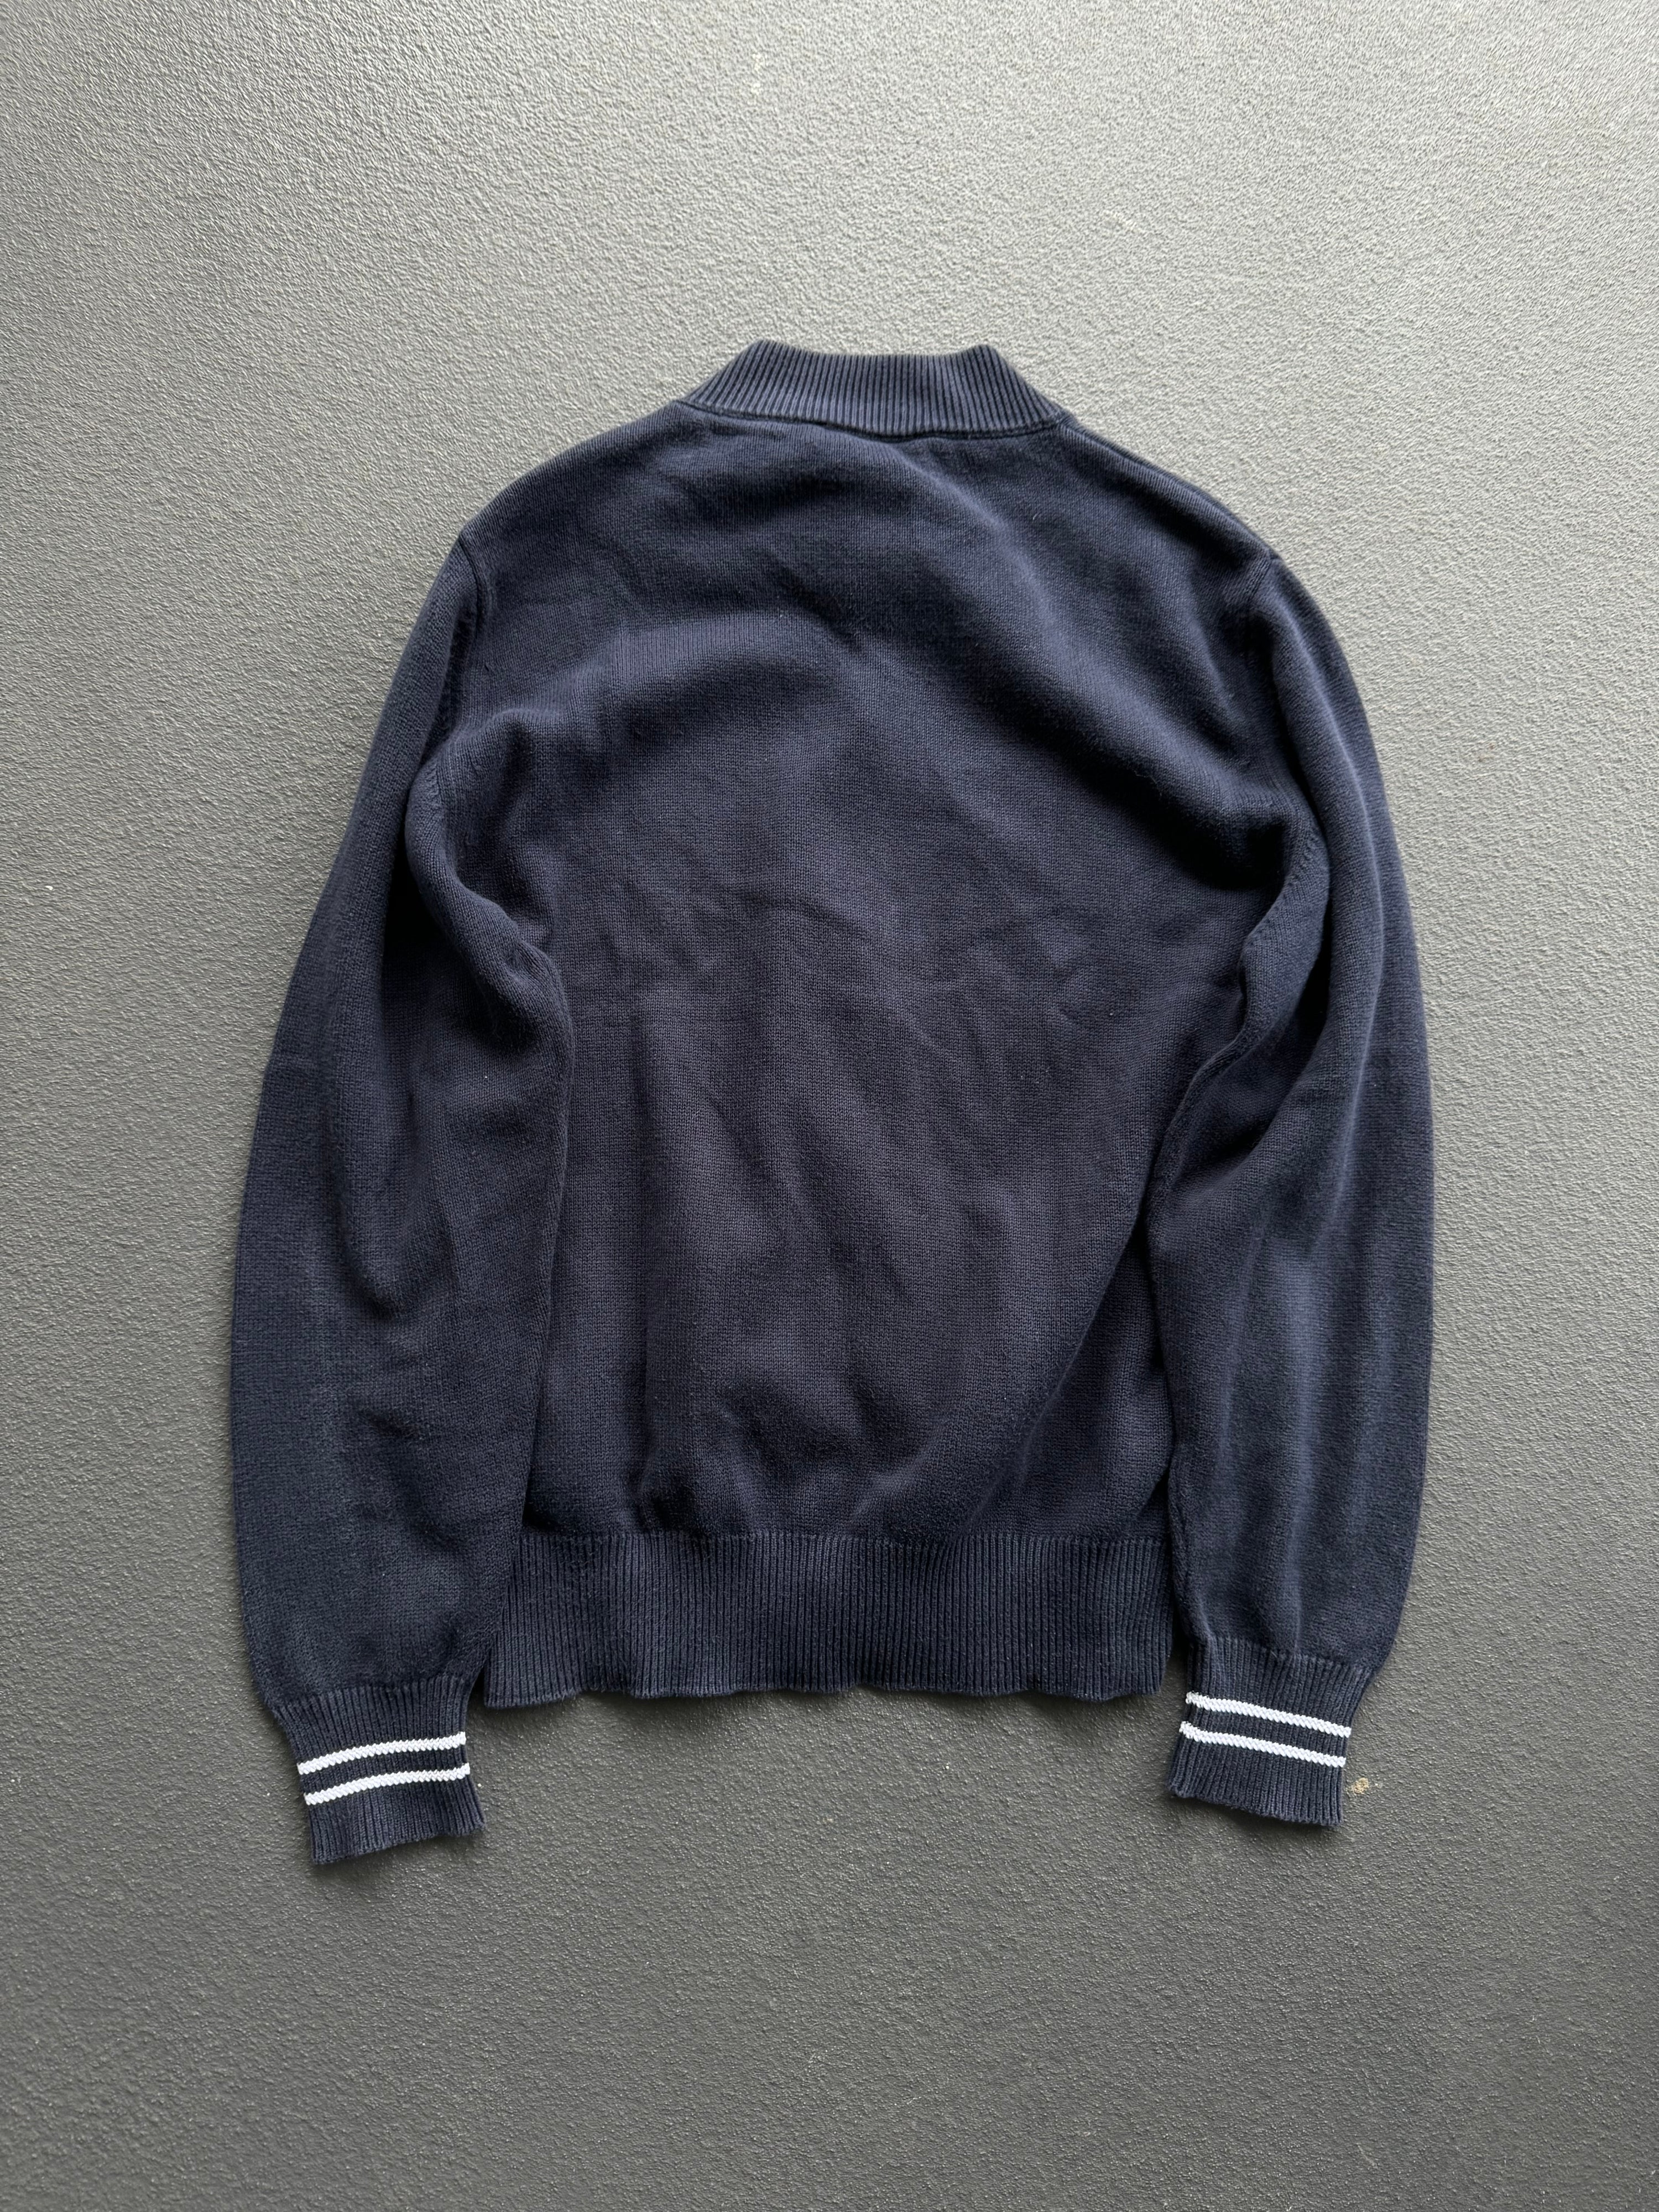 Early 2000s Fred Perry Knit Sweat Jacket (L)